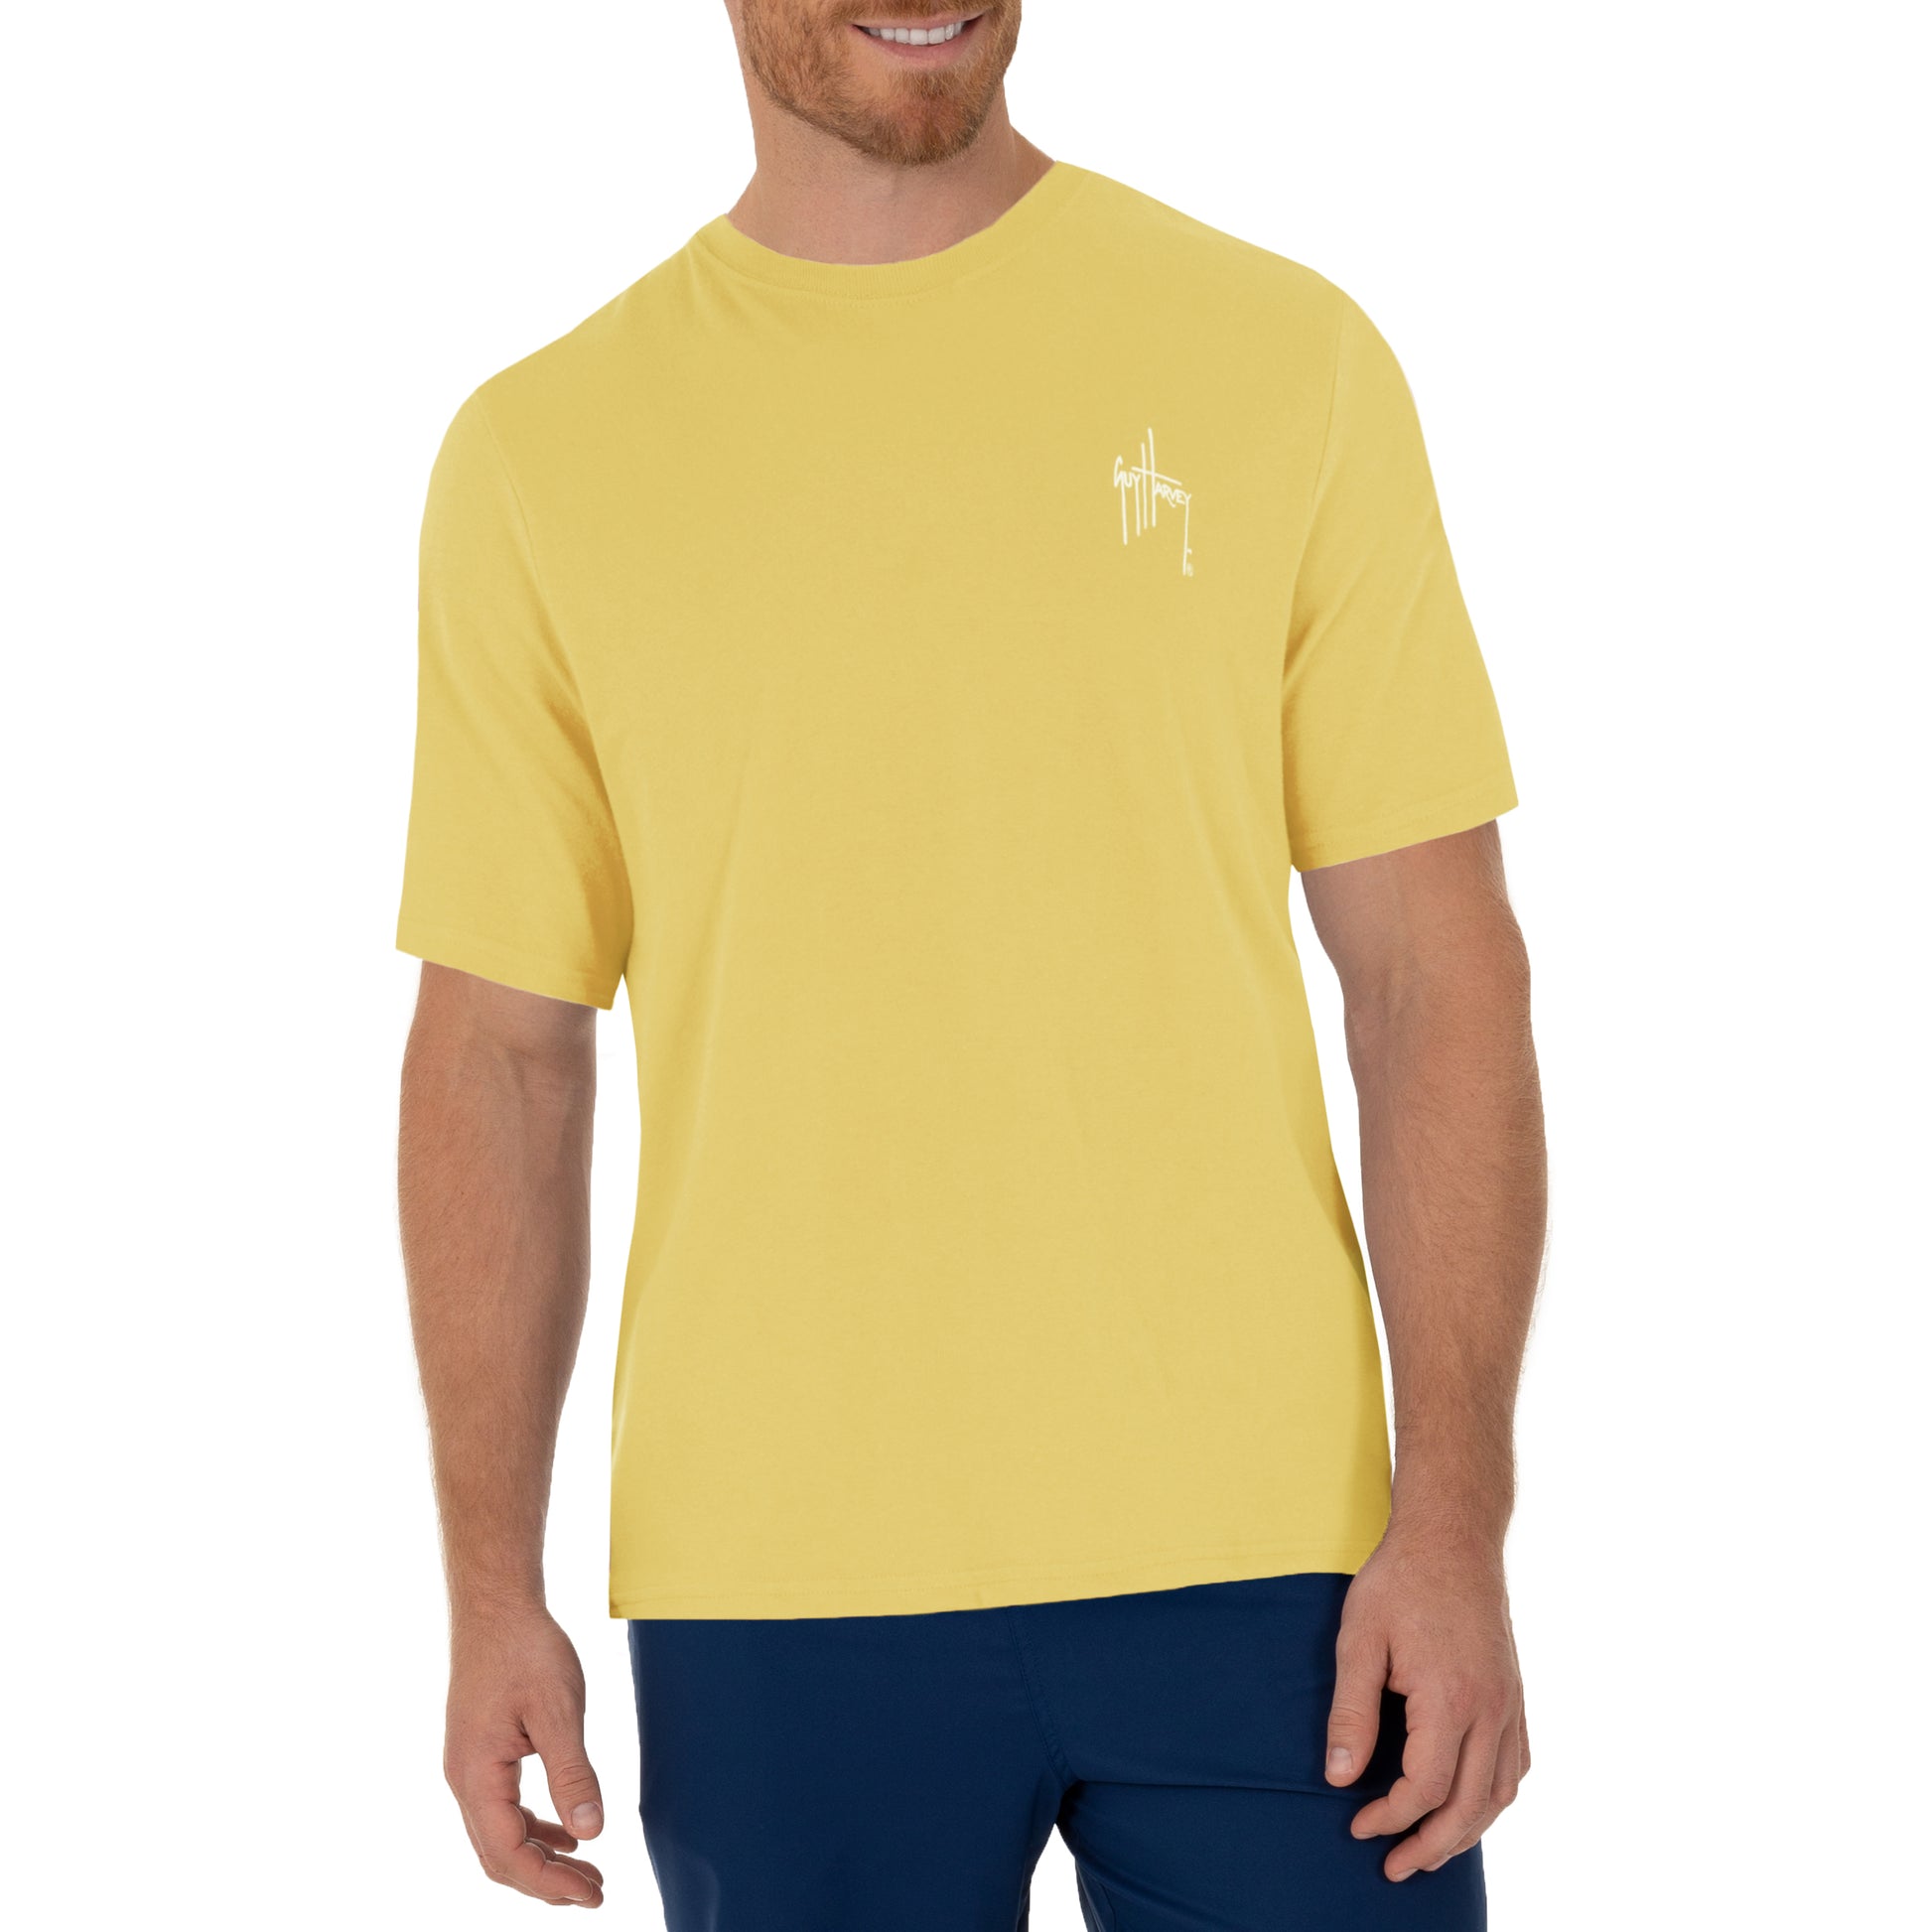 Men's Fast Mover Short Sleeve Yellow T-Shirt View 2